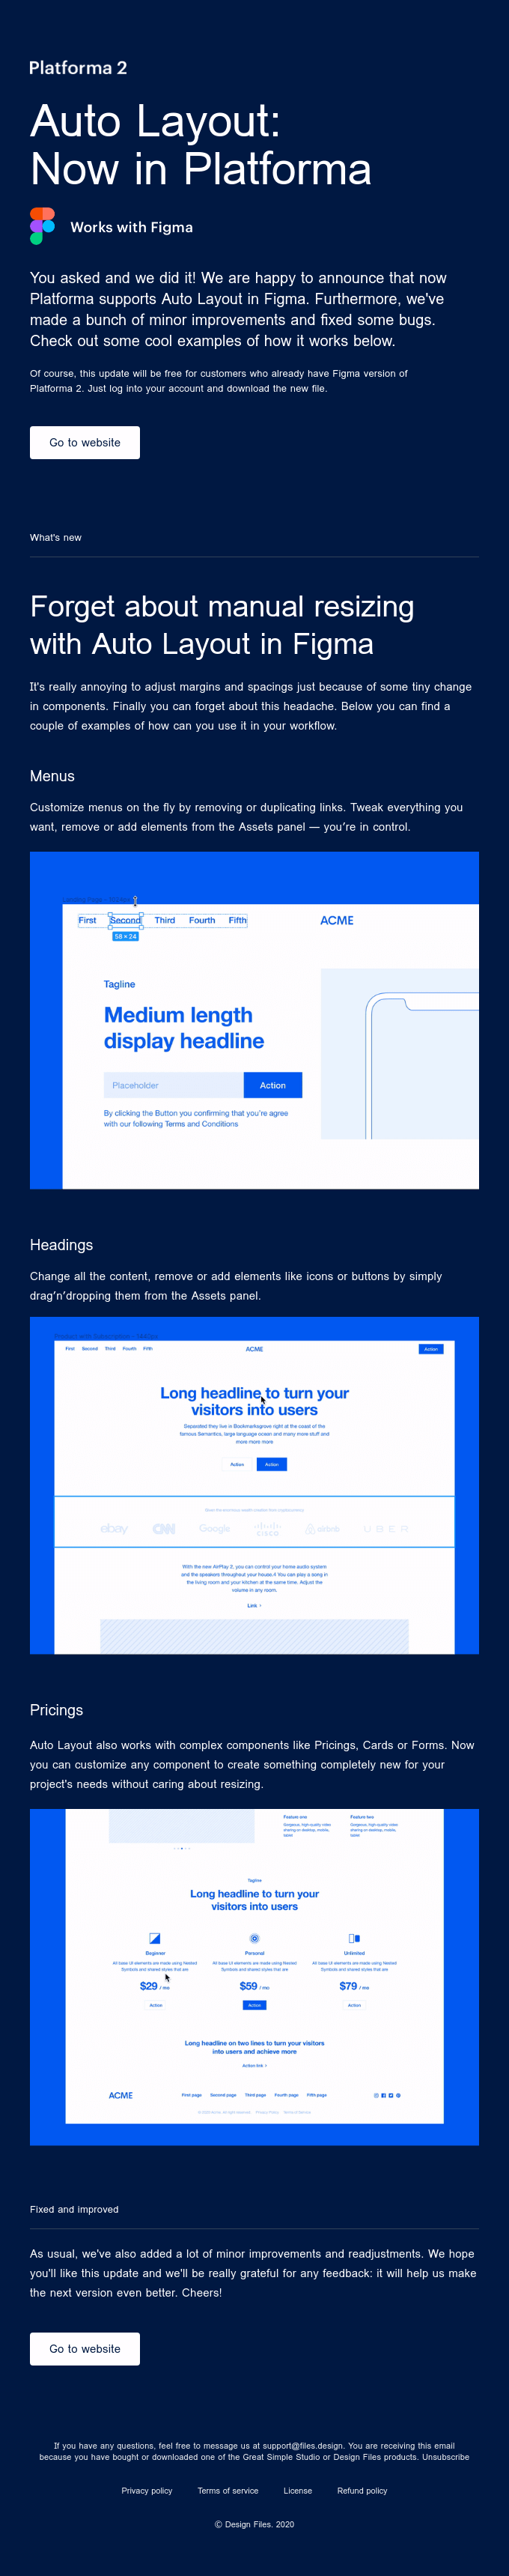 New: Auto Layout in Platforma for Figma - Figma Email Newsletter